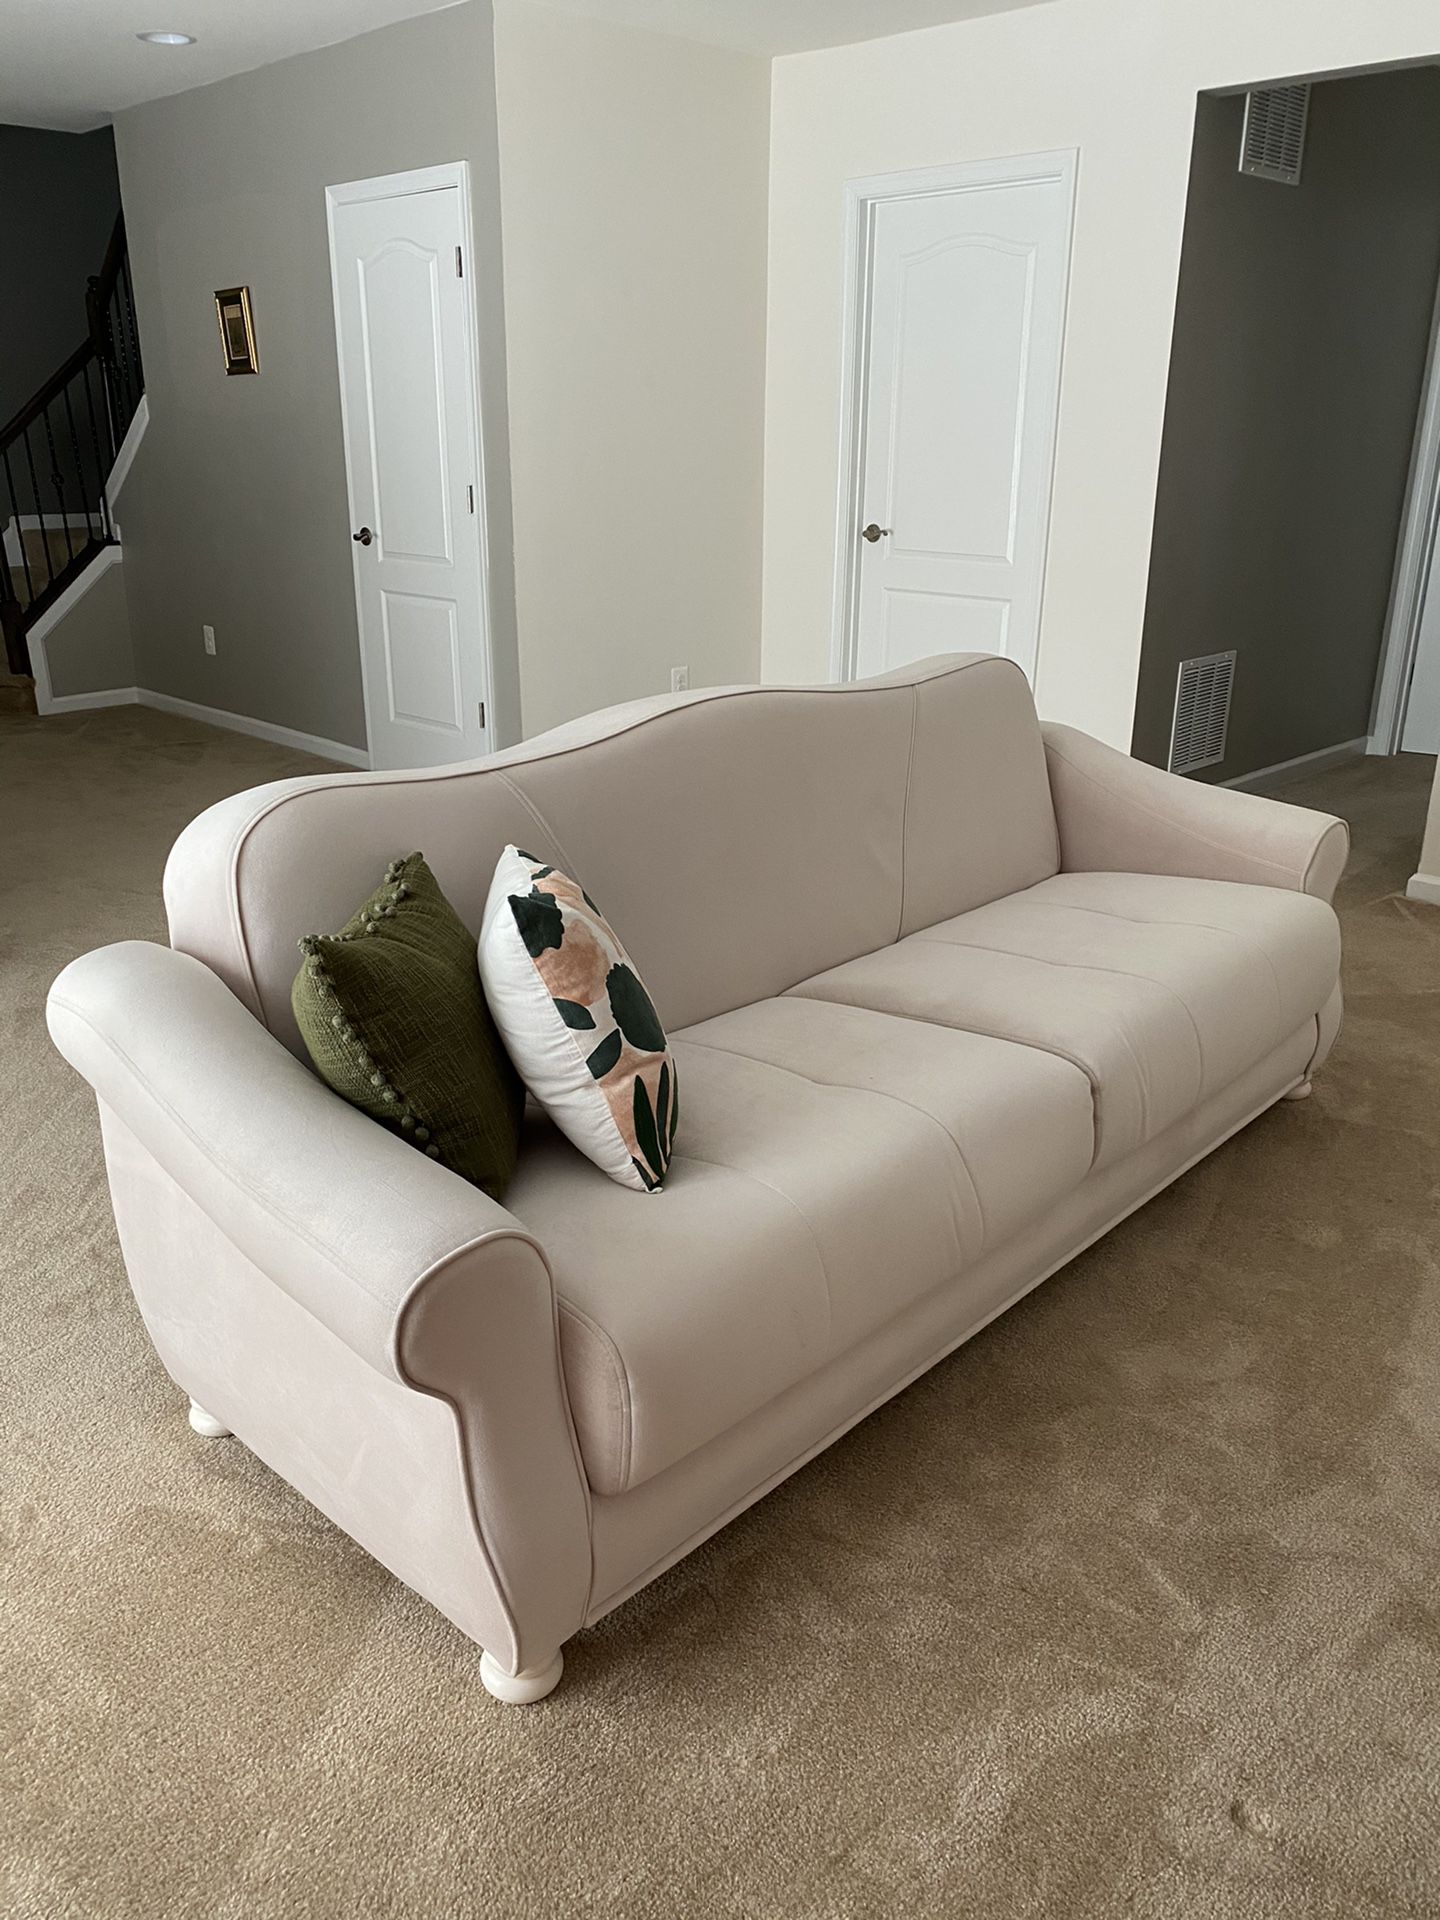 Sofa bed, loveseat bed with storage, recliner set